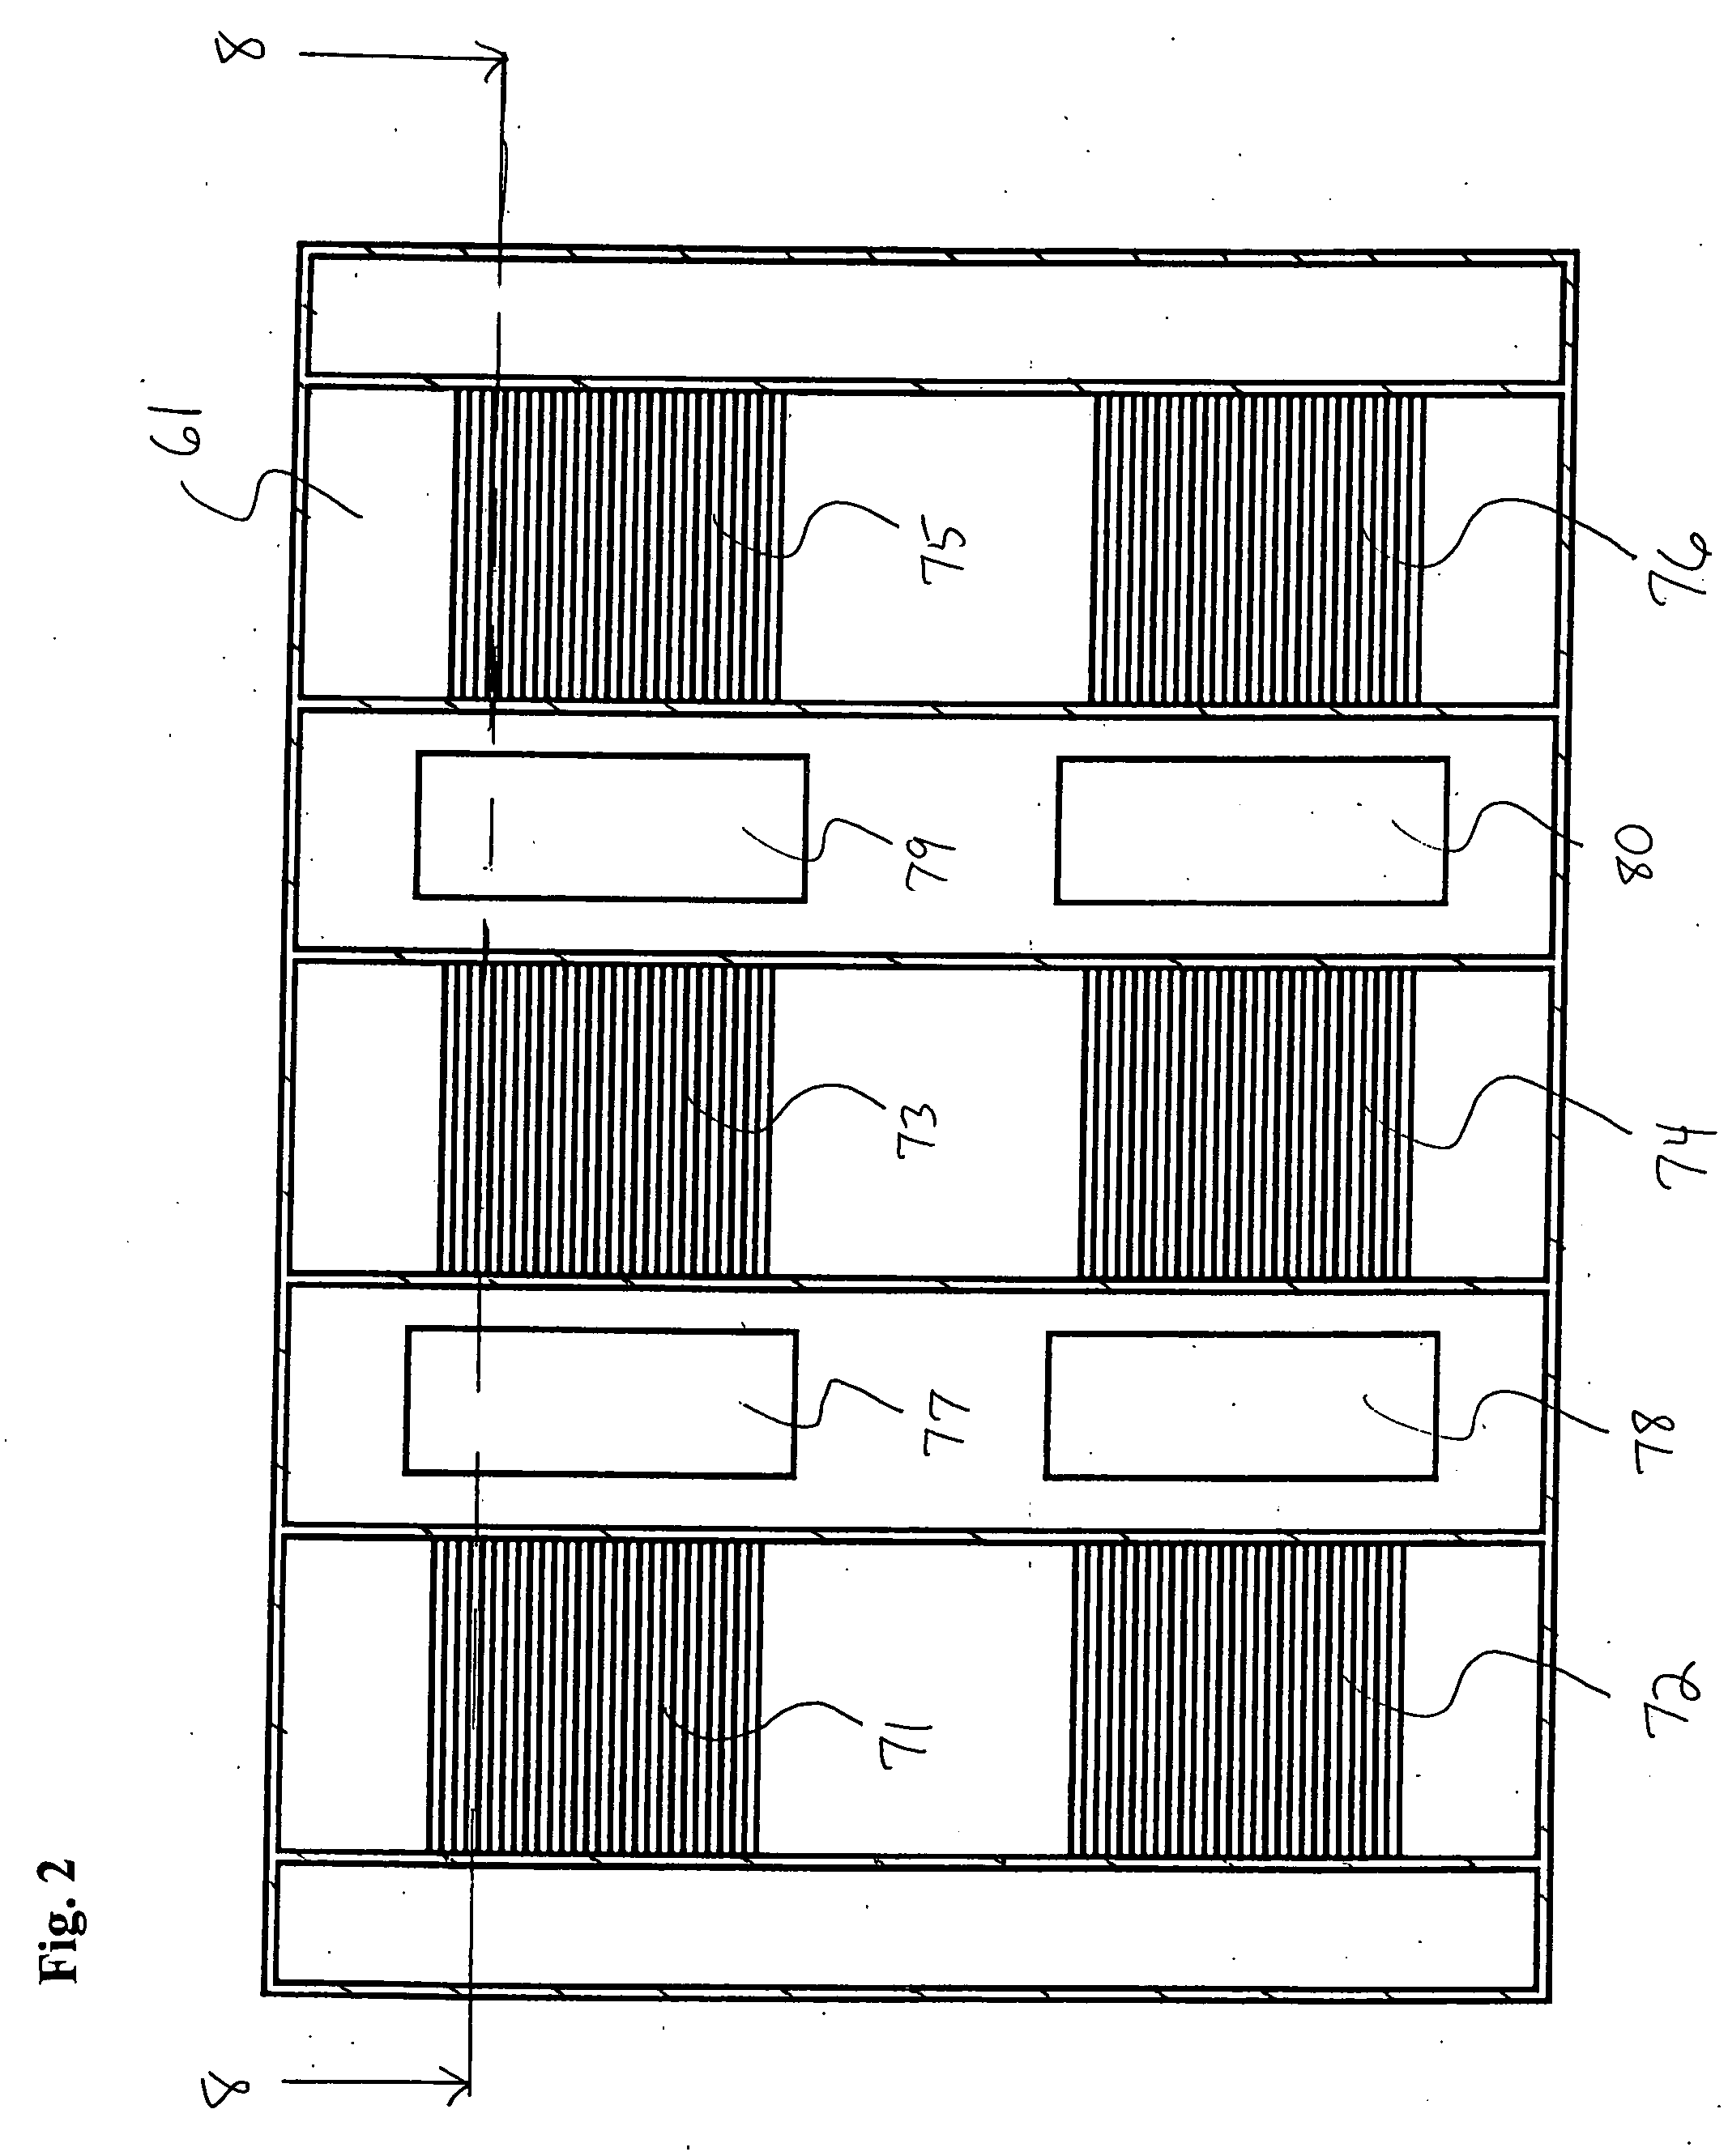 Method and apparatus for dissipating heat, and radar antenna containing heat dissipating apparatus